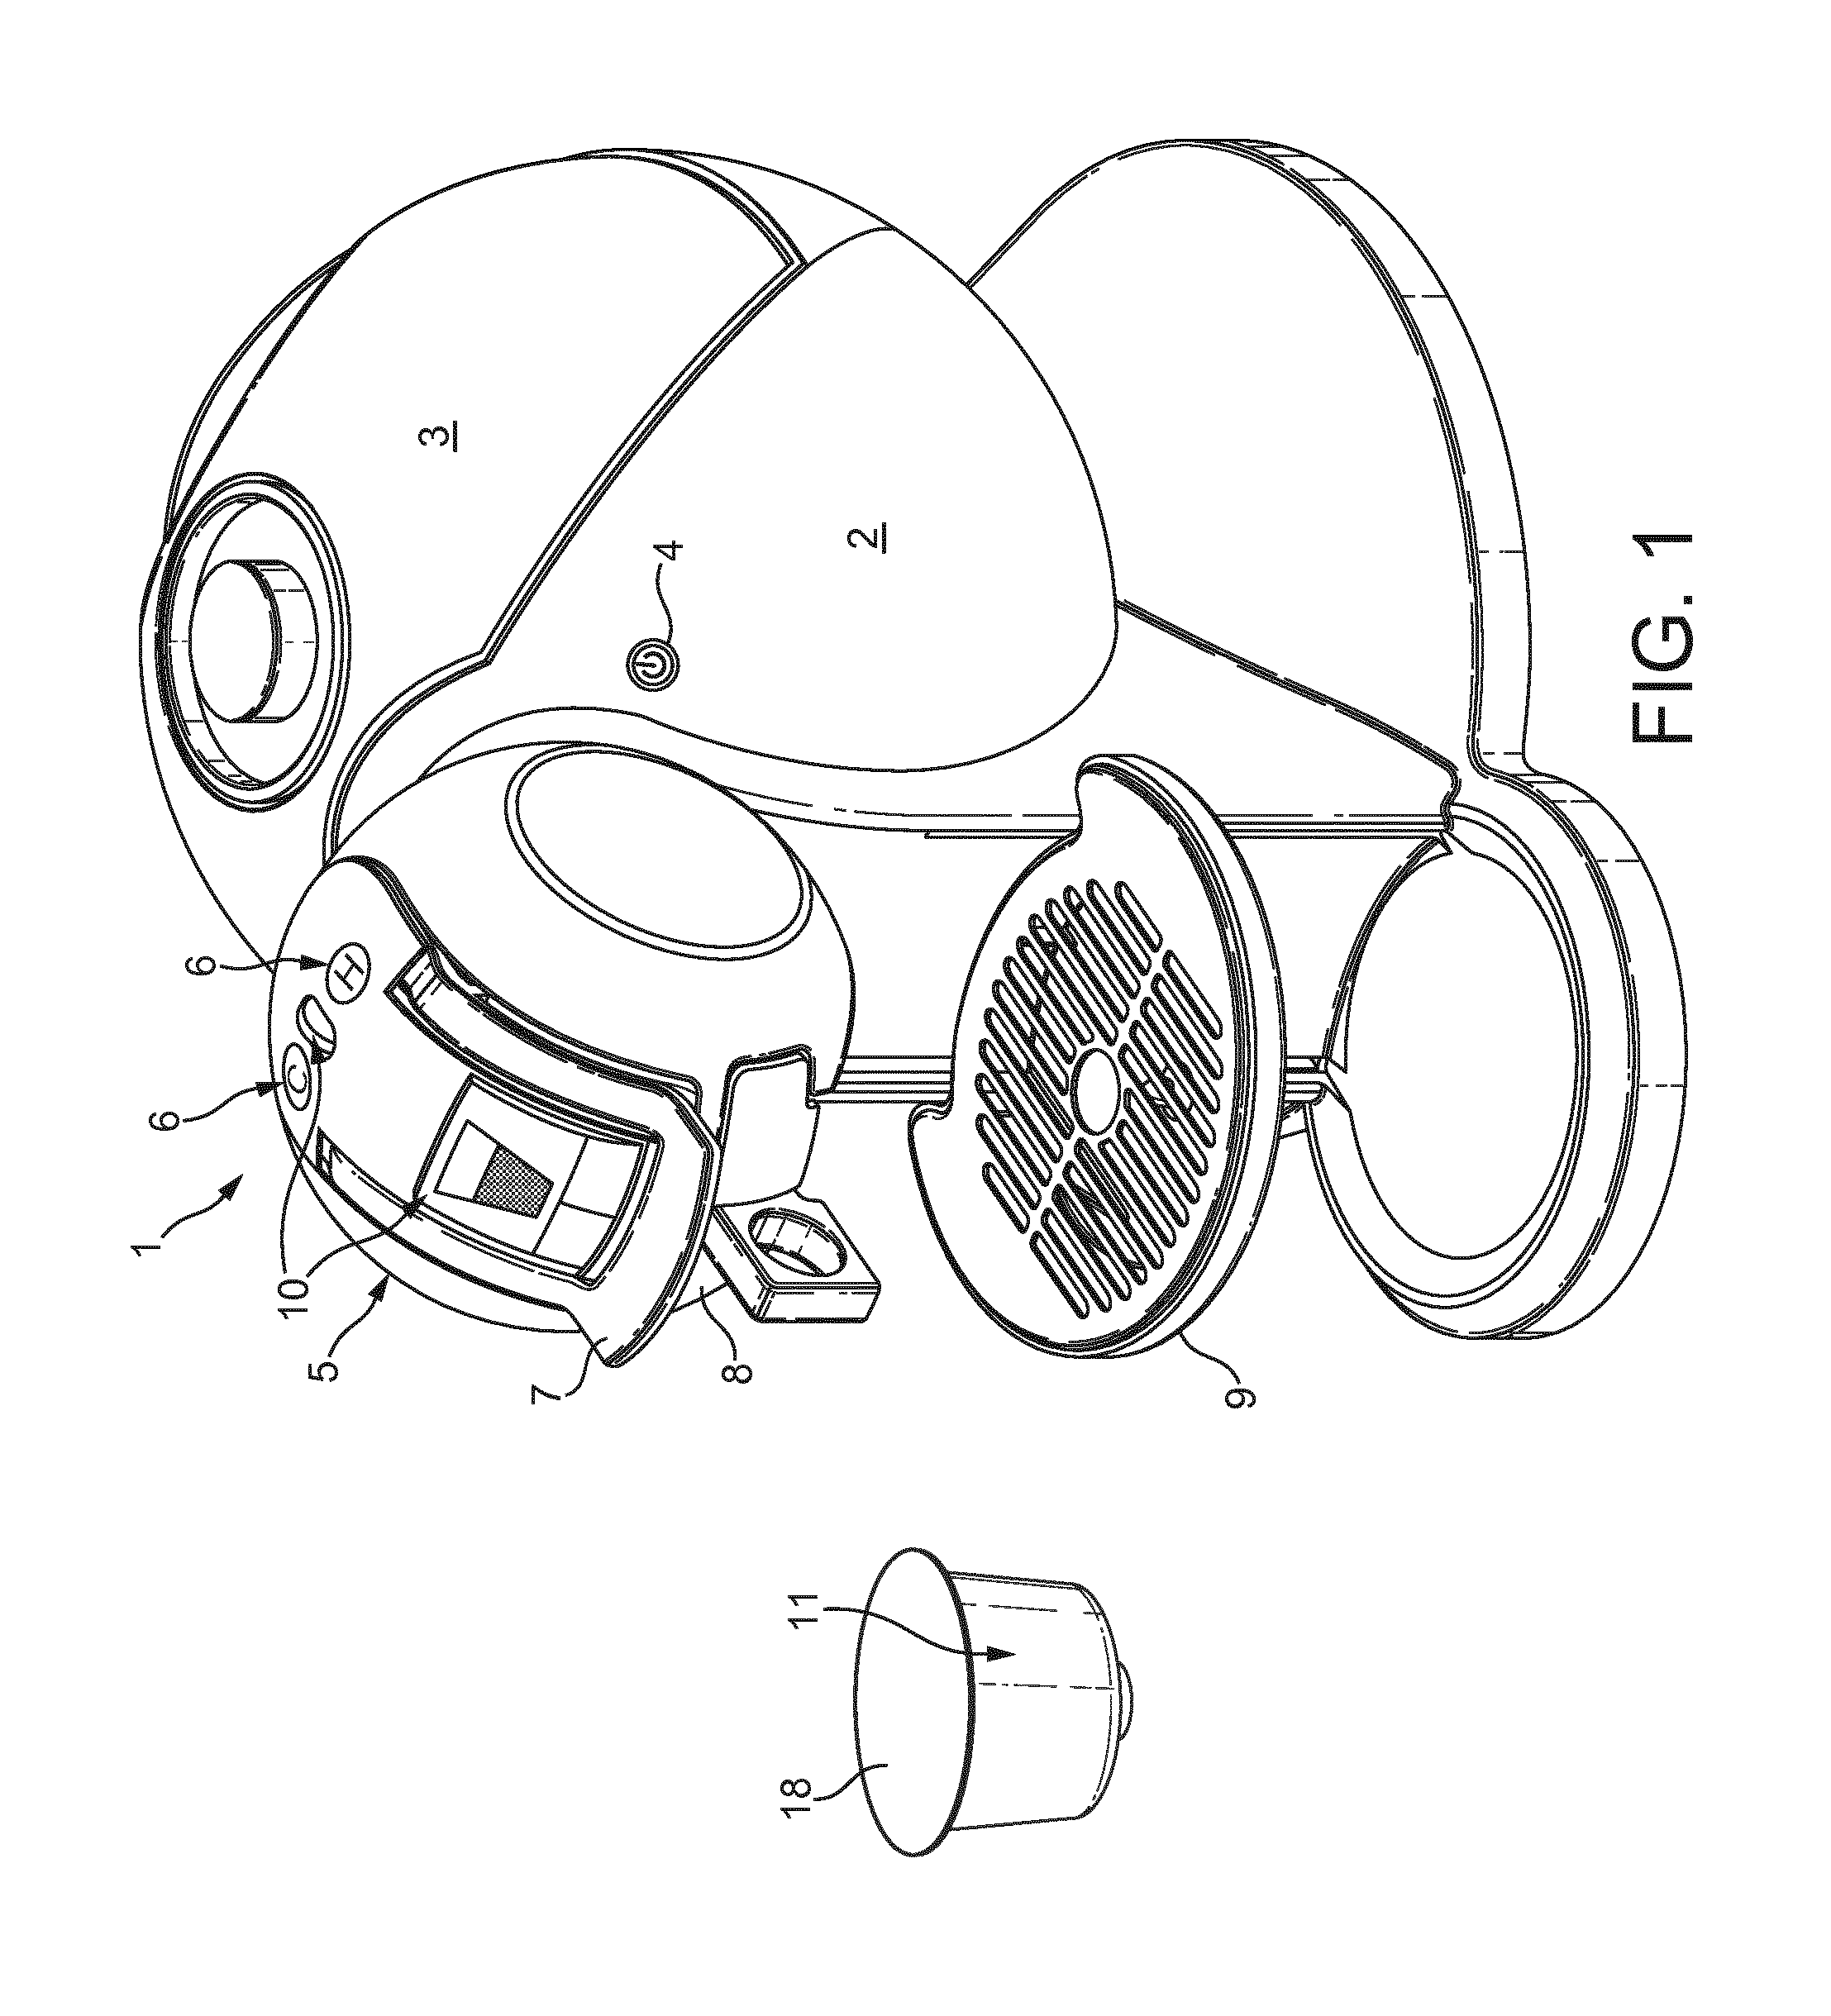 Beverage capsule with Anti-dripping membrane